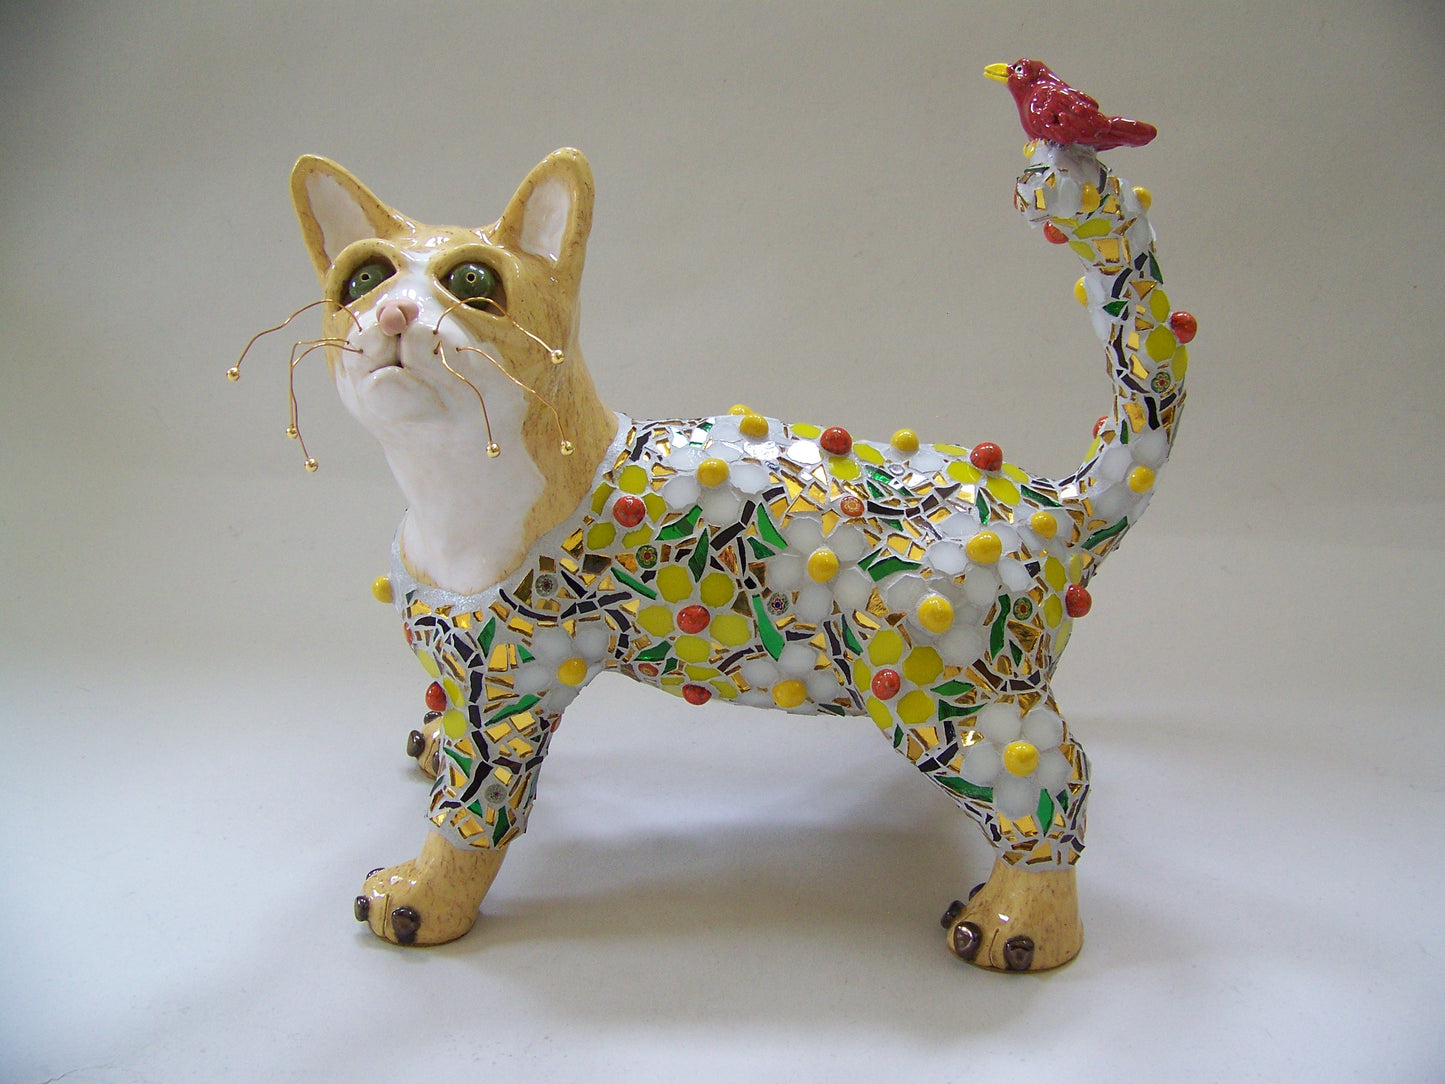 Flower Pattern Glass and Ceramic Mosaic Cat and Bird Sculpture